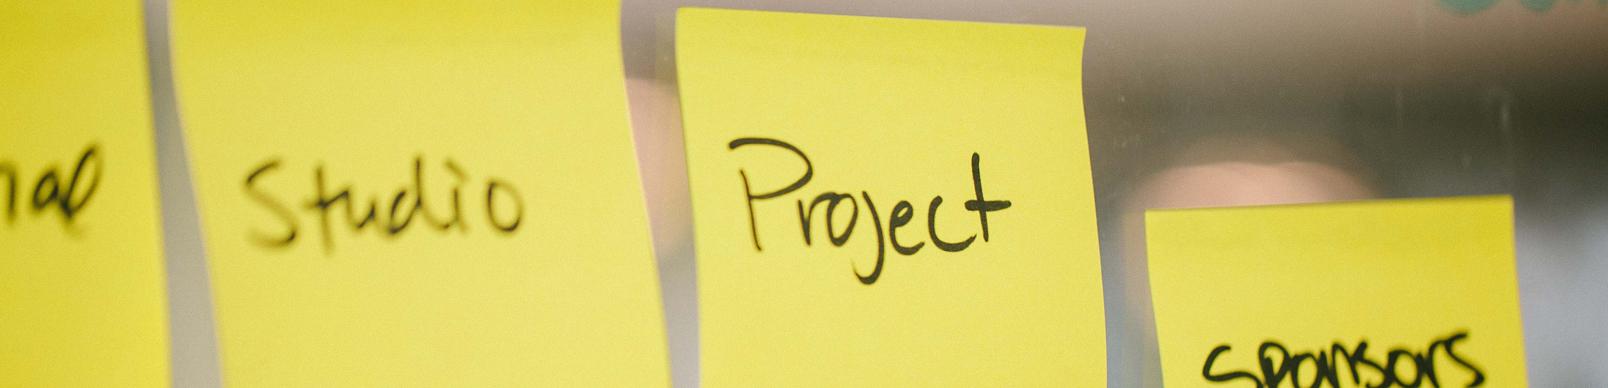 Picture of post-it notes from a design session.